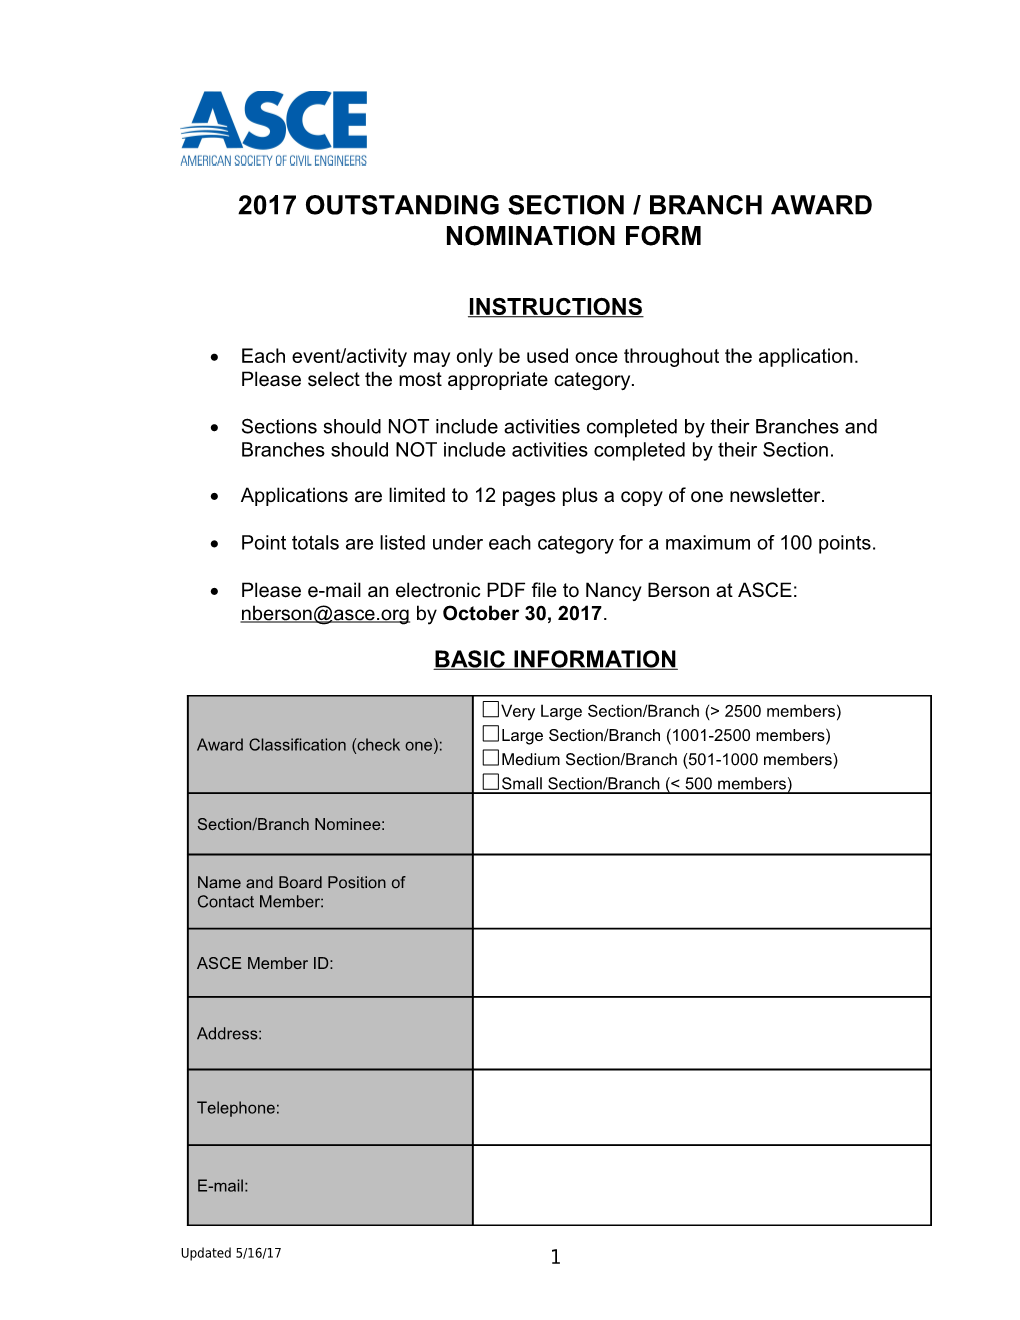 2017 Outstanding Section / Branch Award Nomination Form